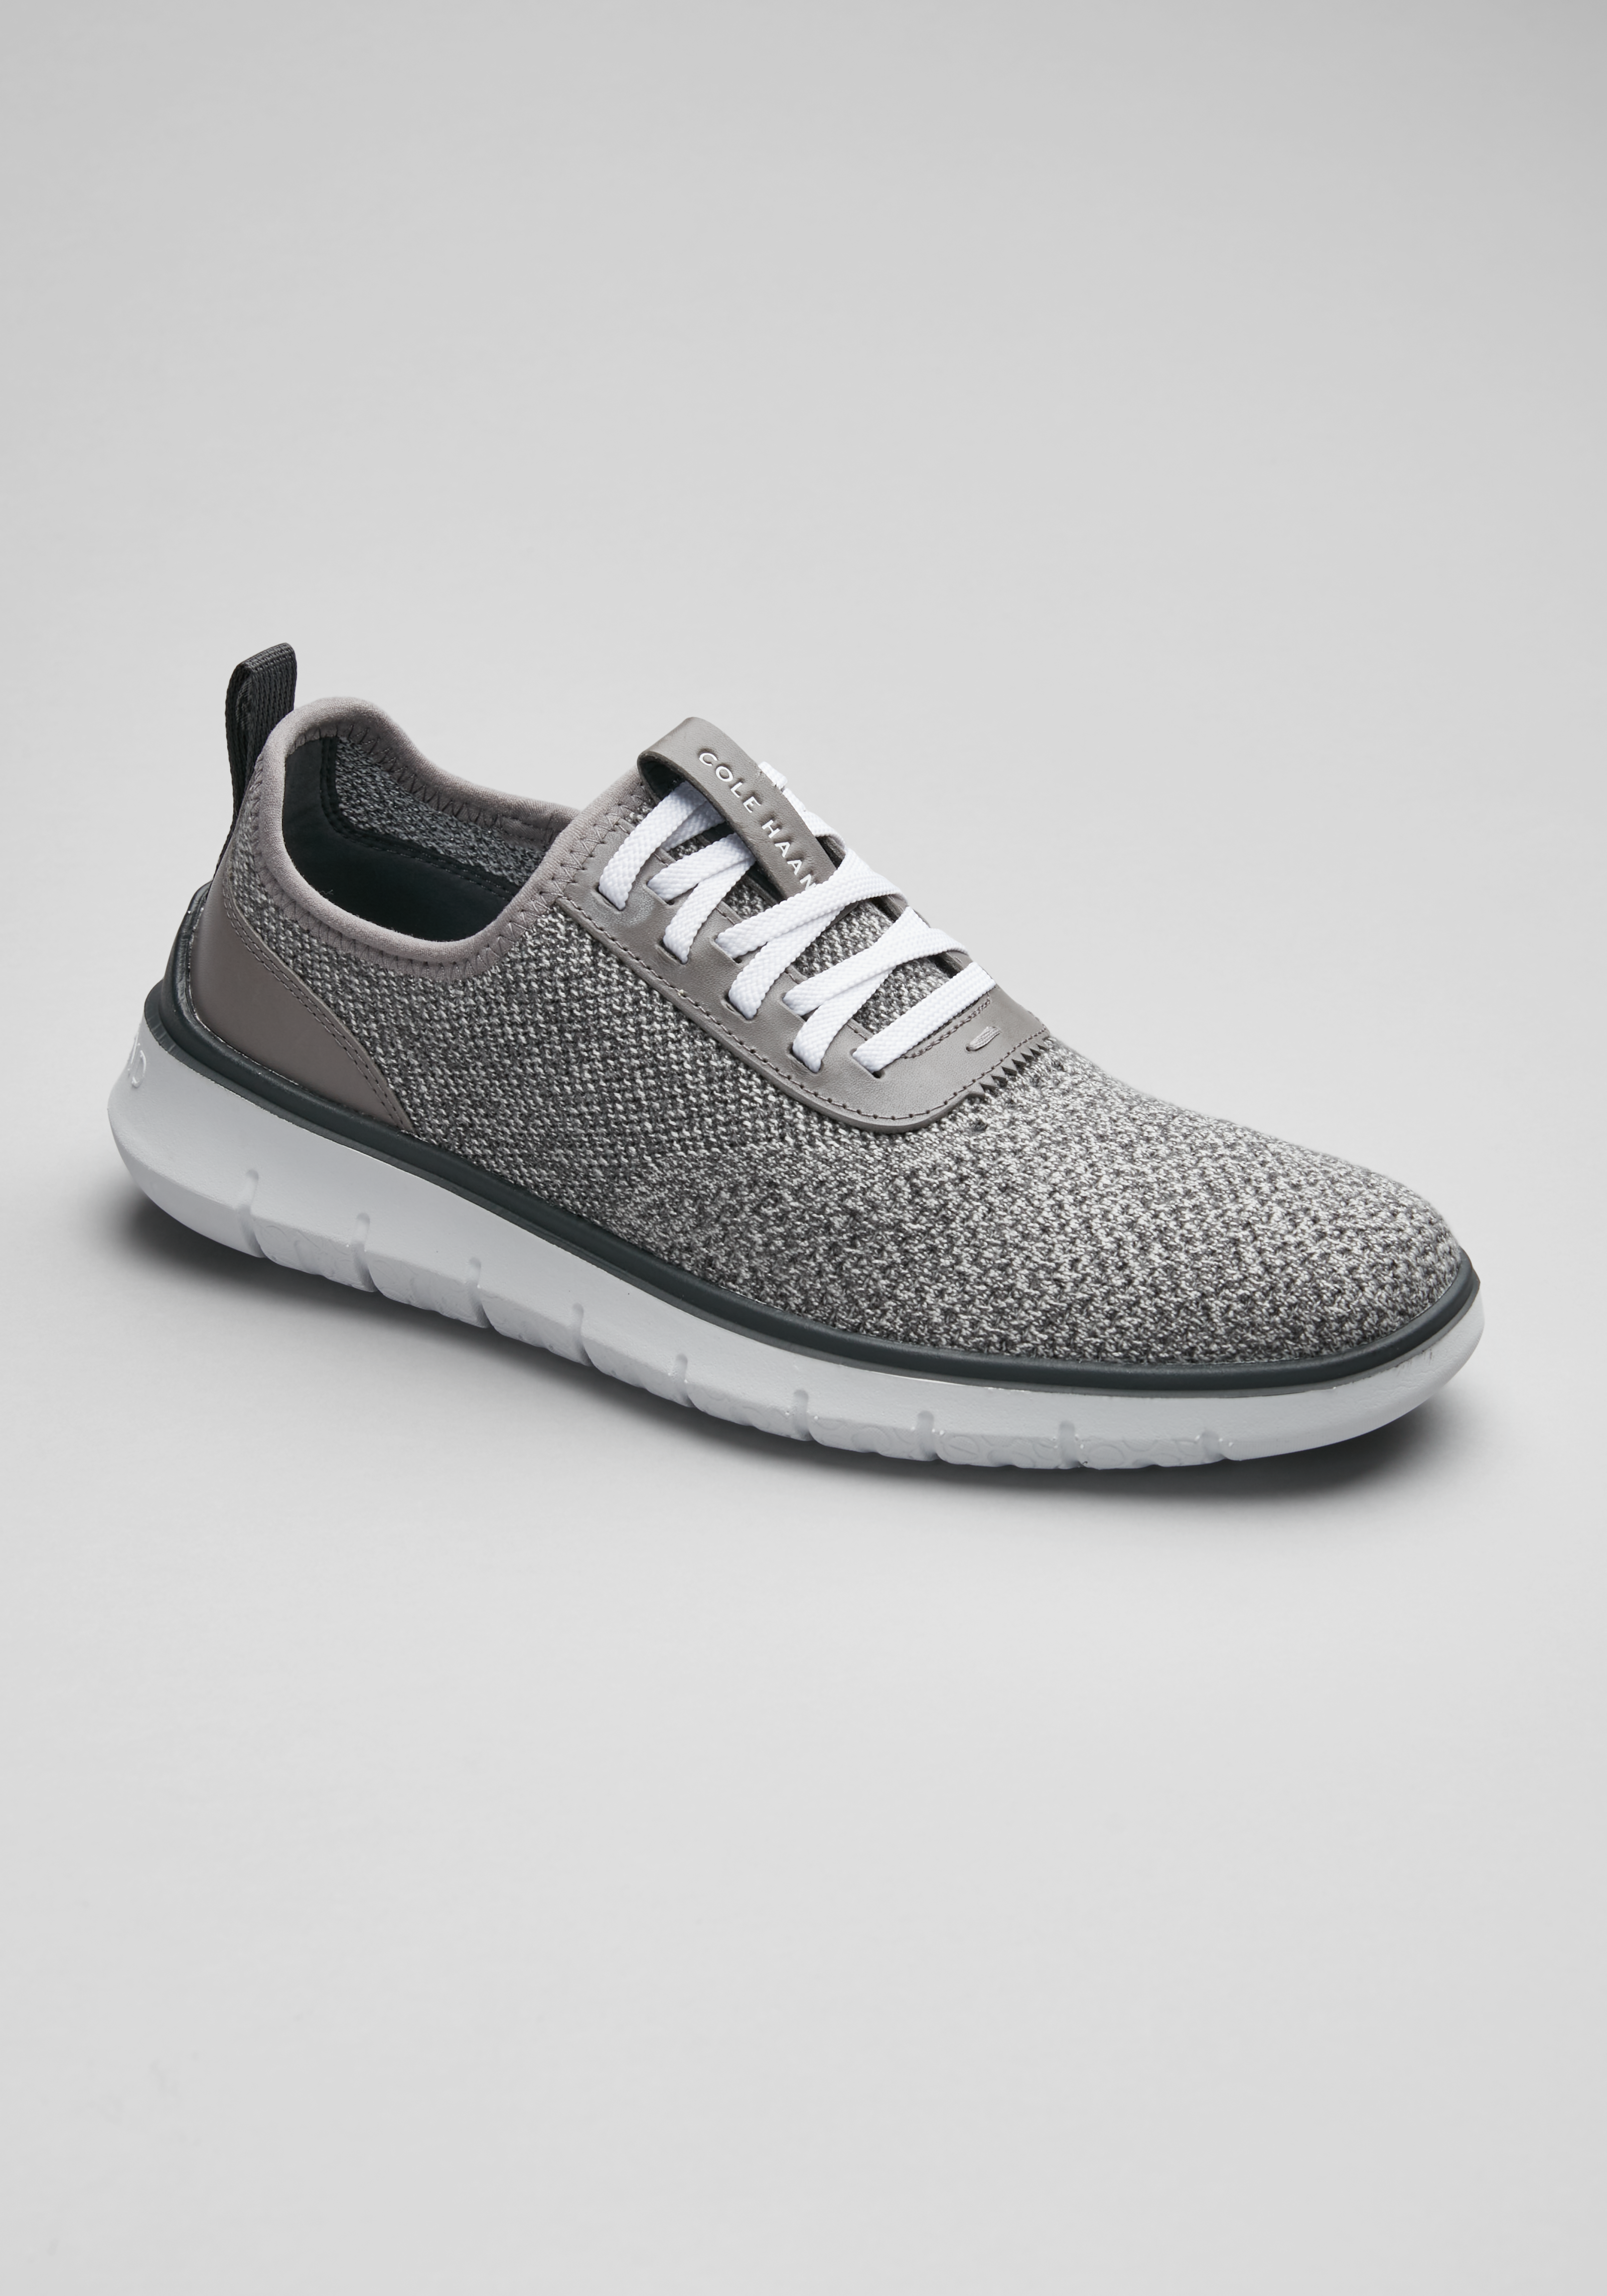 Cole Haan Generation Zerogrand Stitchlite™ Sneakers CLEARANCE